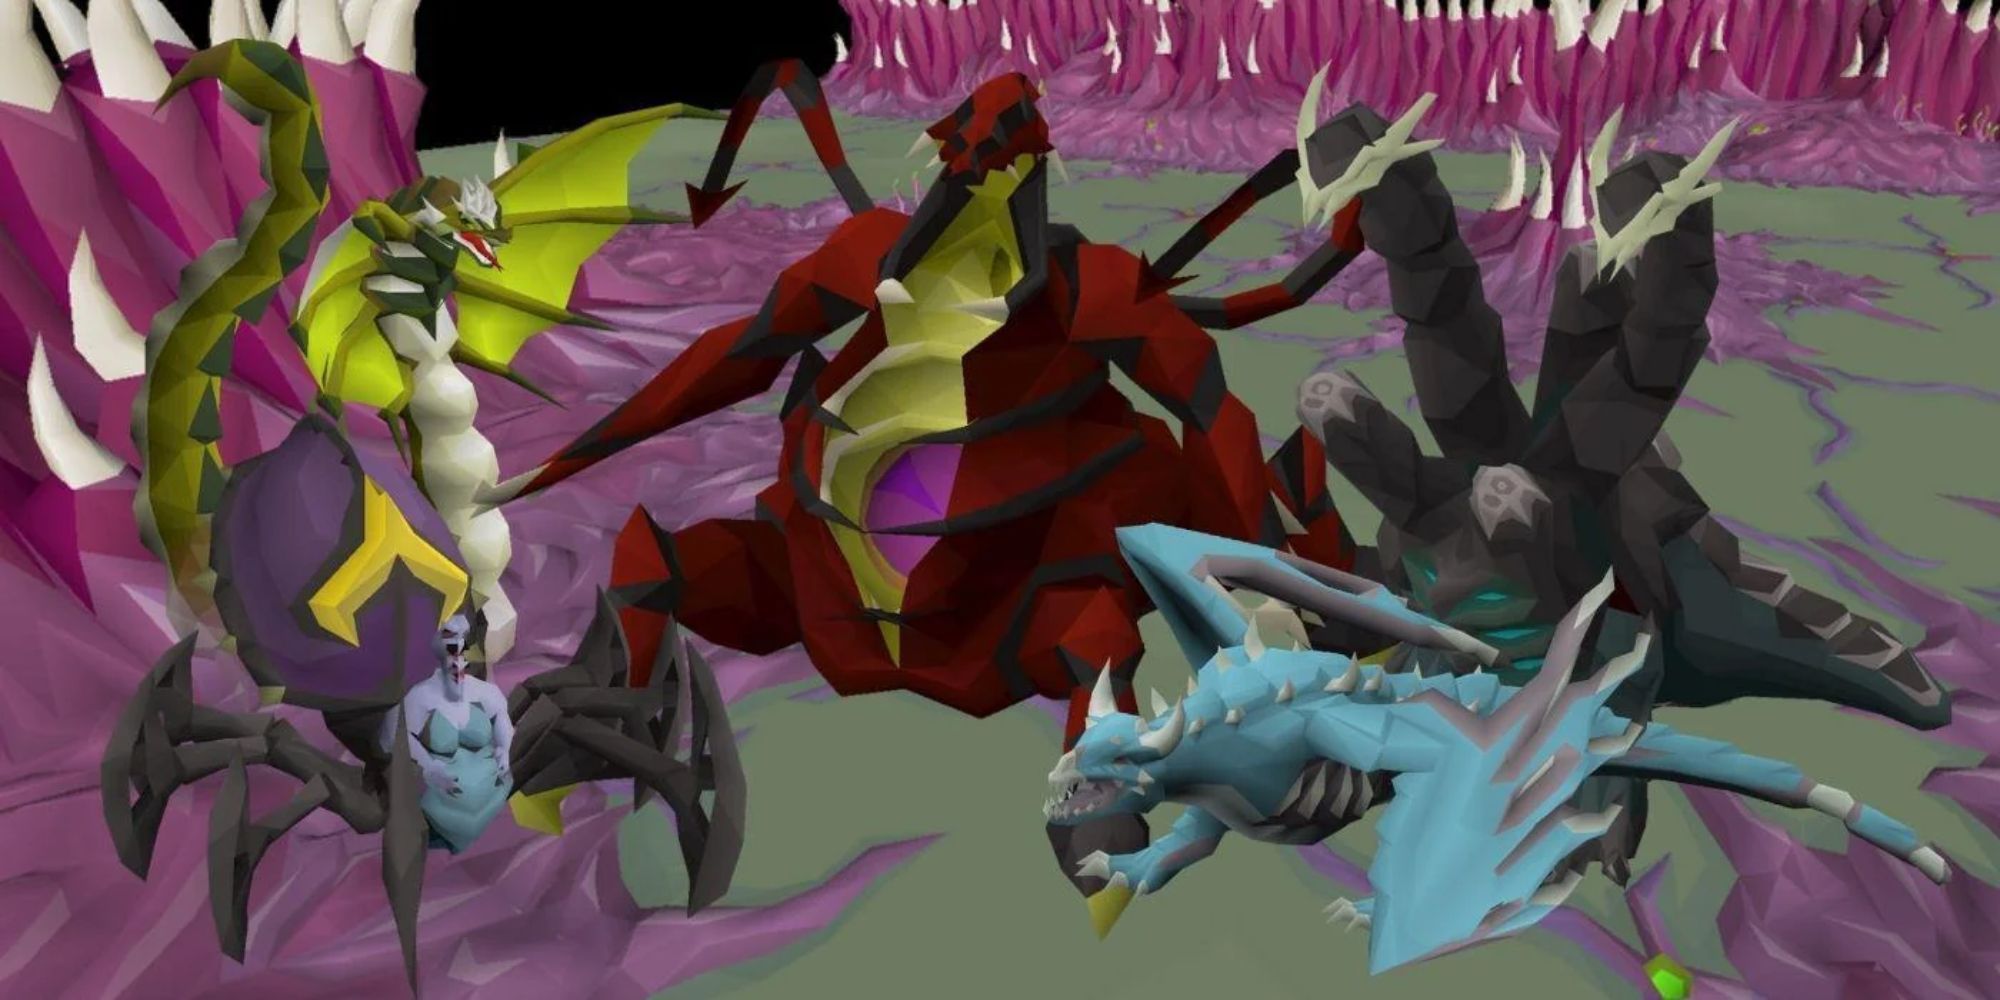 Various, brightly colored Runescape bosses, such as hydra, Zulrah, Vorkath, and others.